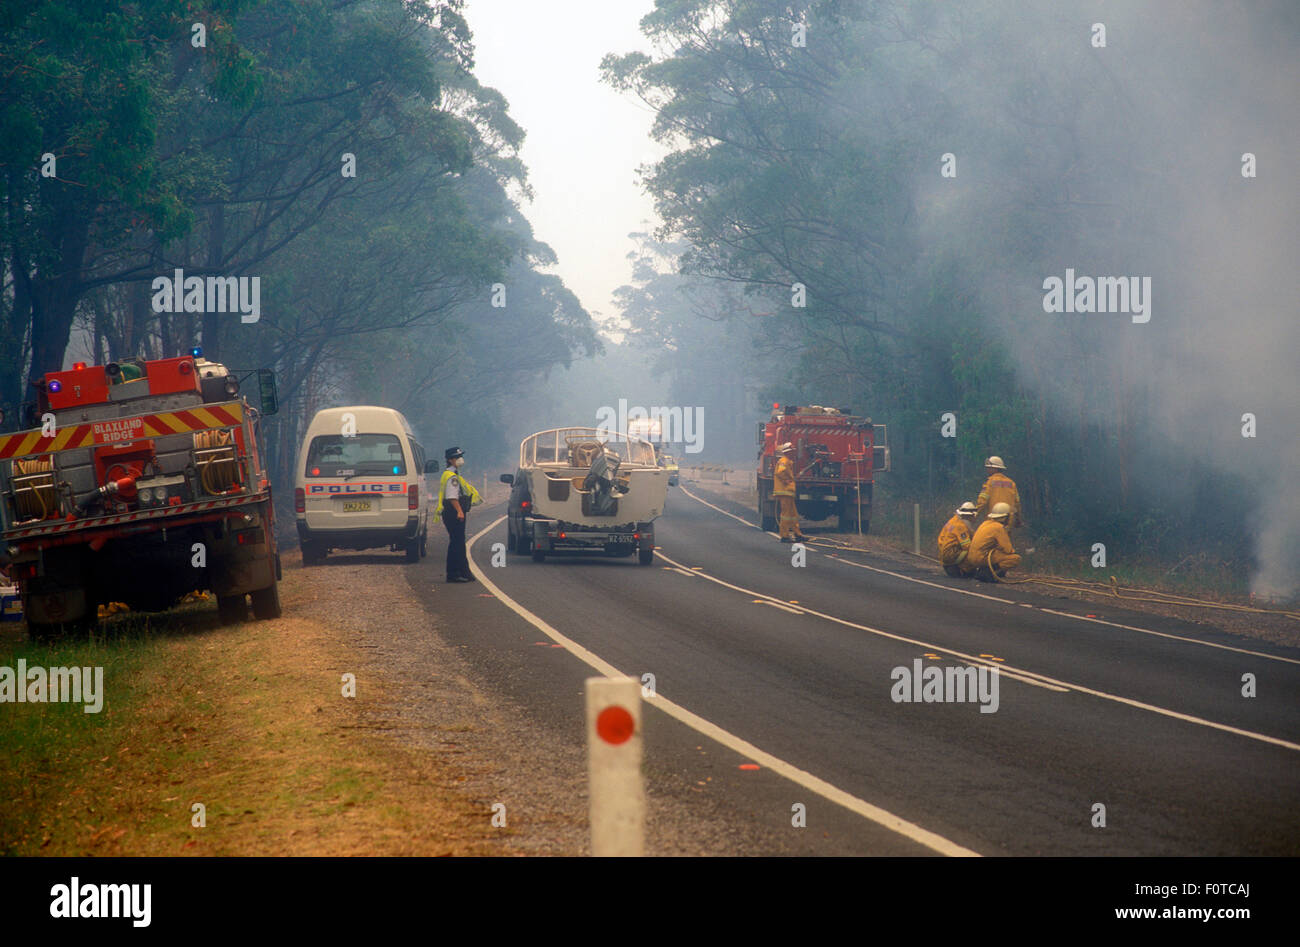 POLICE AND FIRE SERVICES STAND BY AS BUSH FIRES APPROACH A HIGHWAY, SYDNEY, NSW, AUSTRALIA Stock Photo